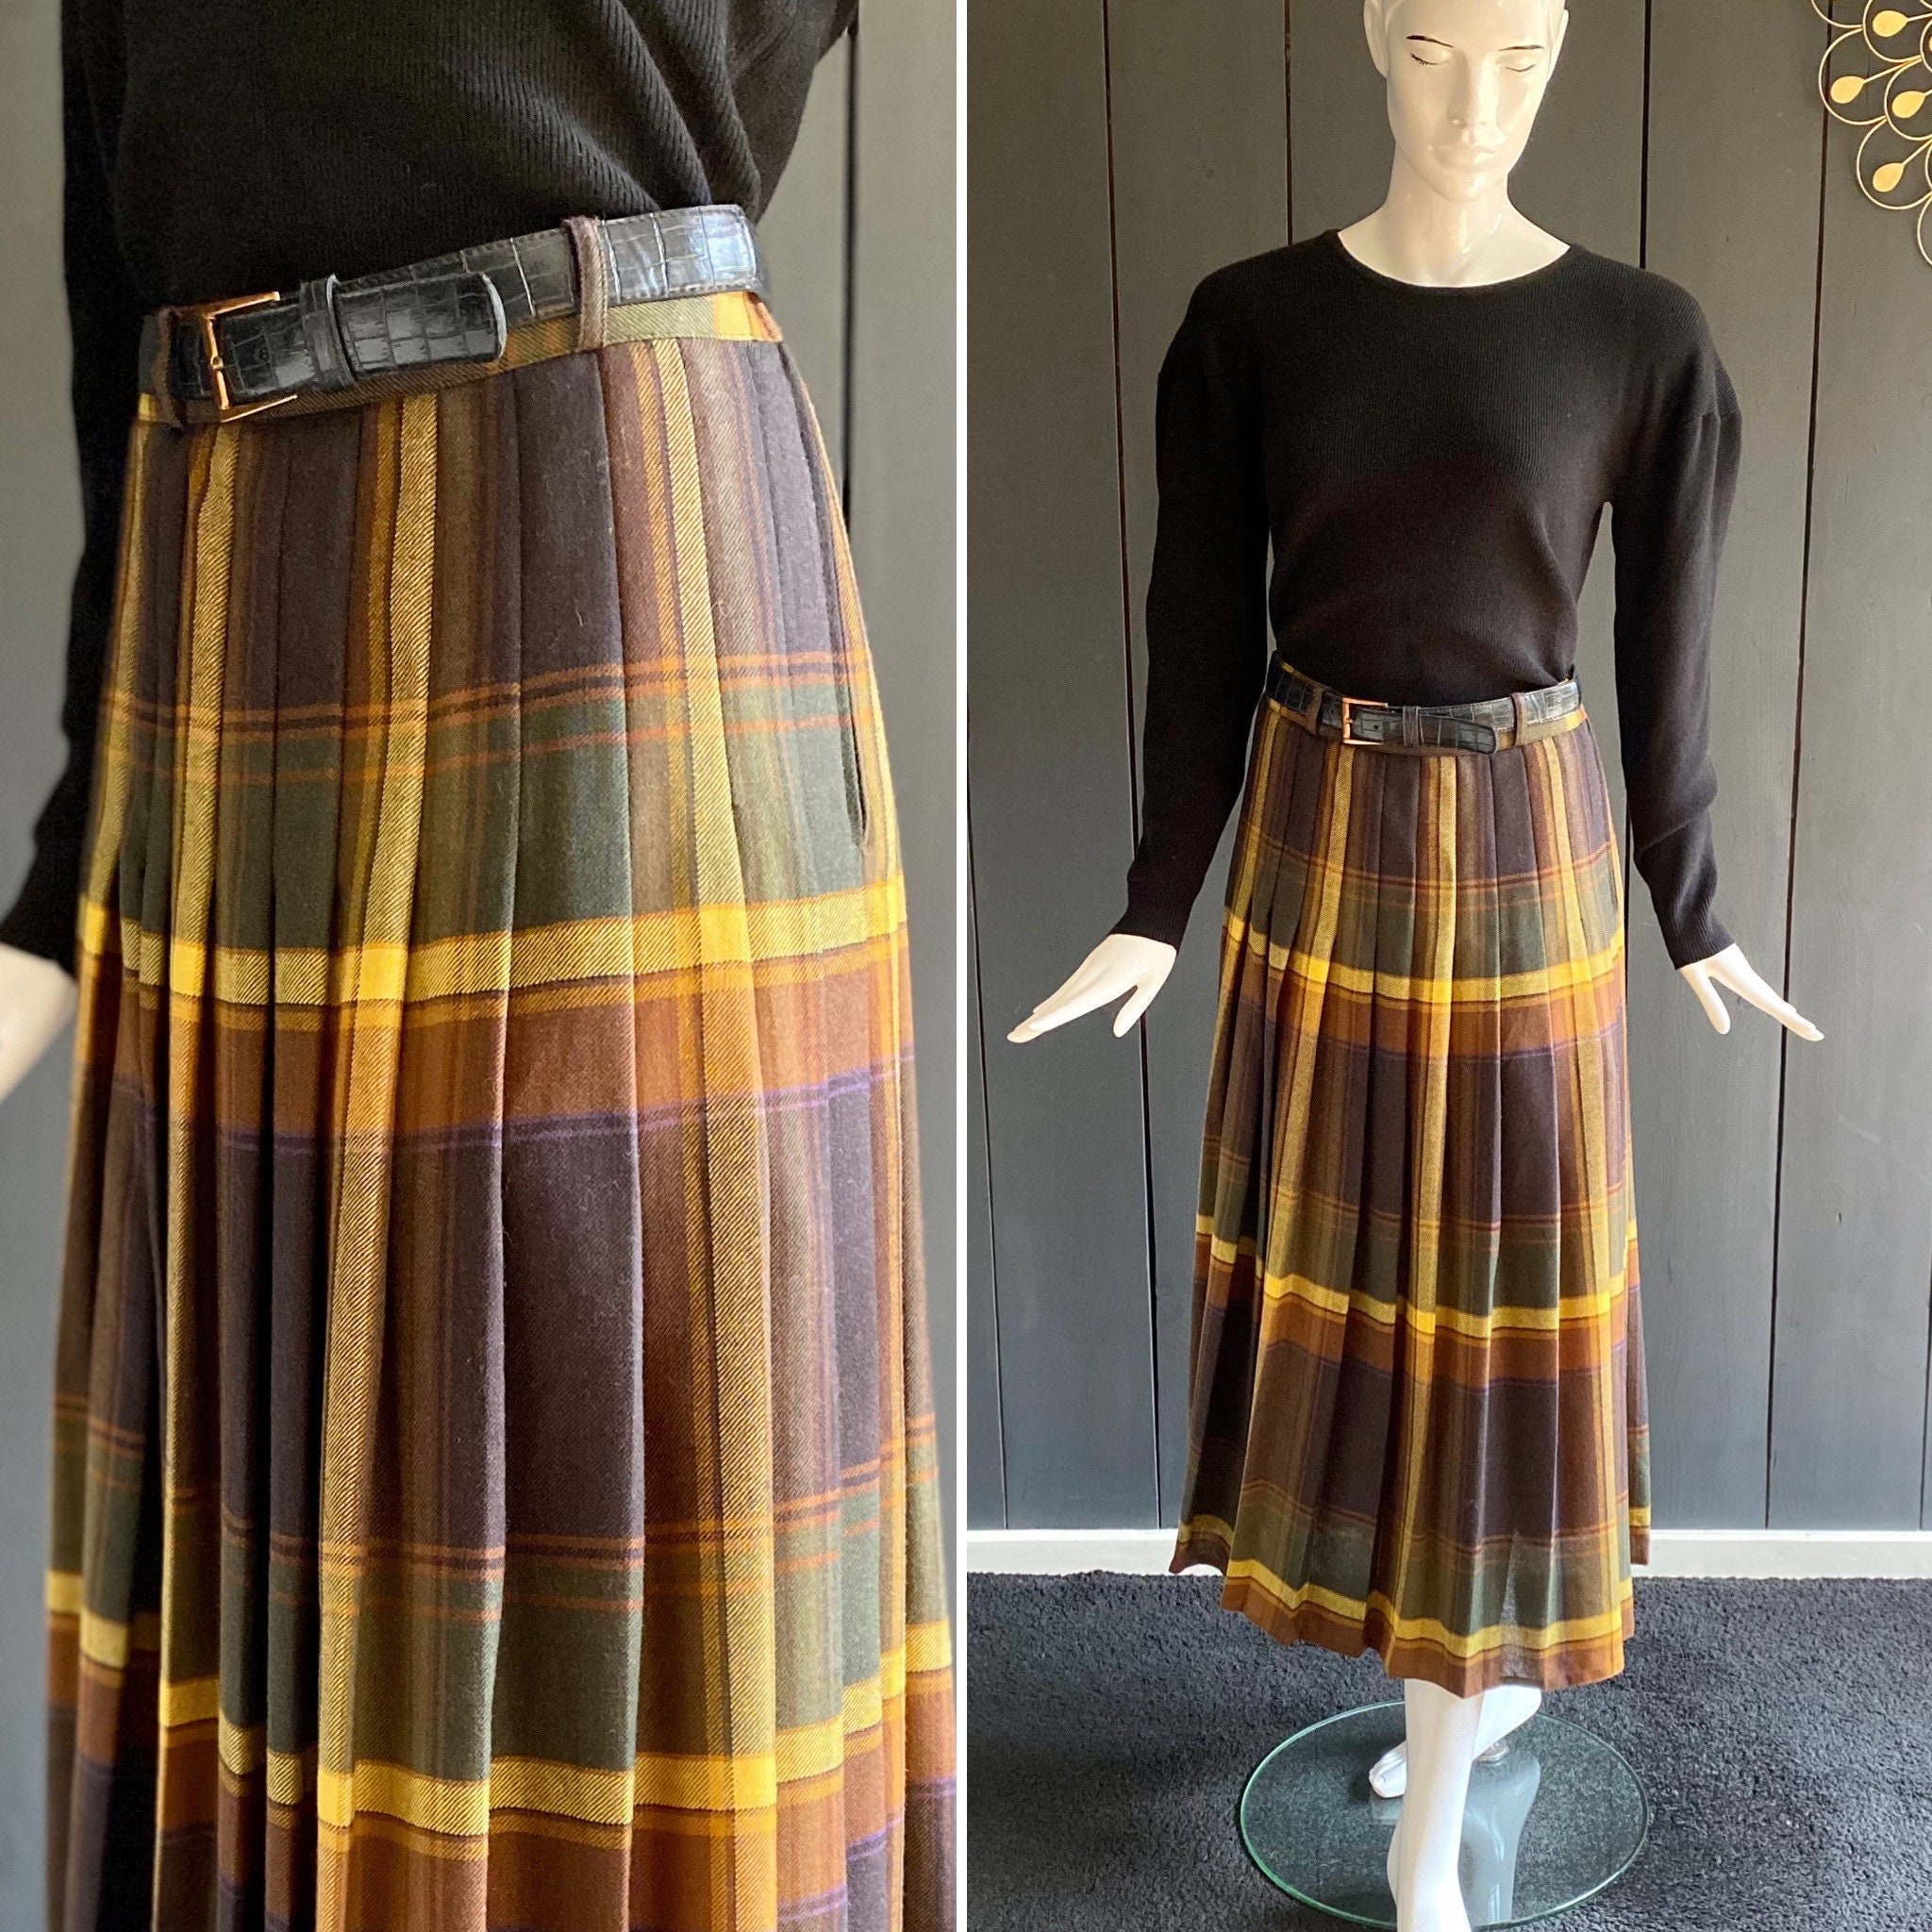 in Gerry Skirt With Matching in Belt, Vintage Wool, Weber Yellow 34/36 Etsy Pleated Tones, Size Long Superb 90s Brown - and